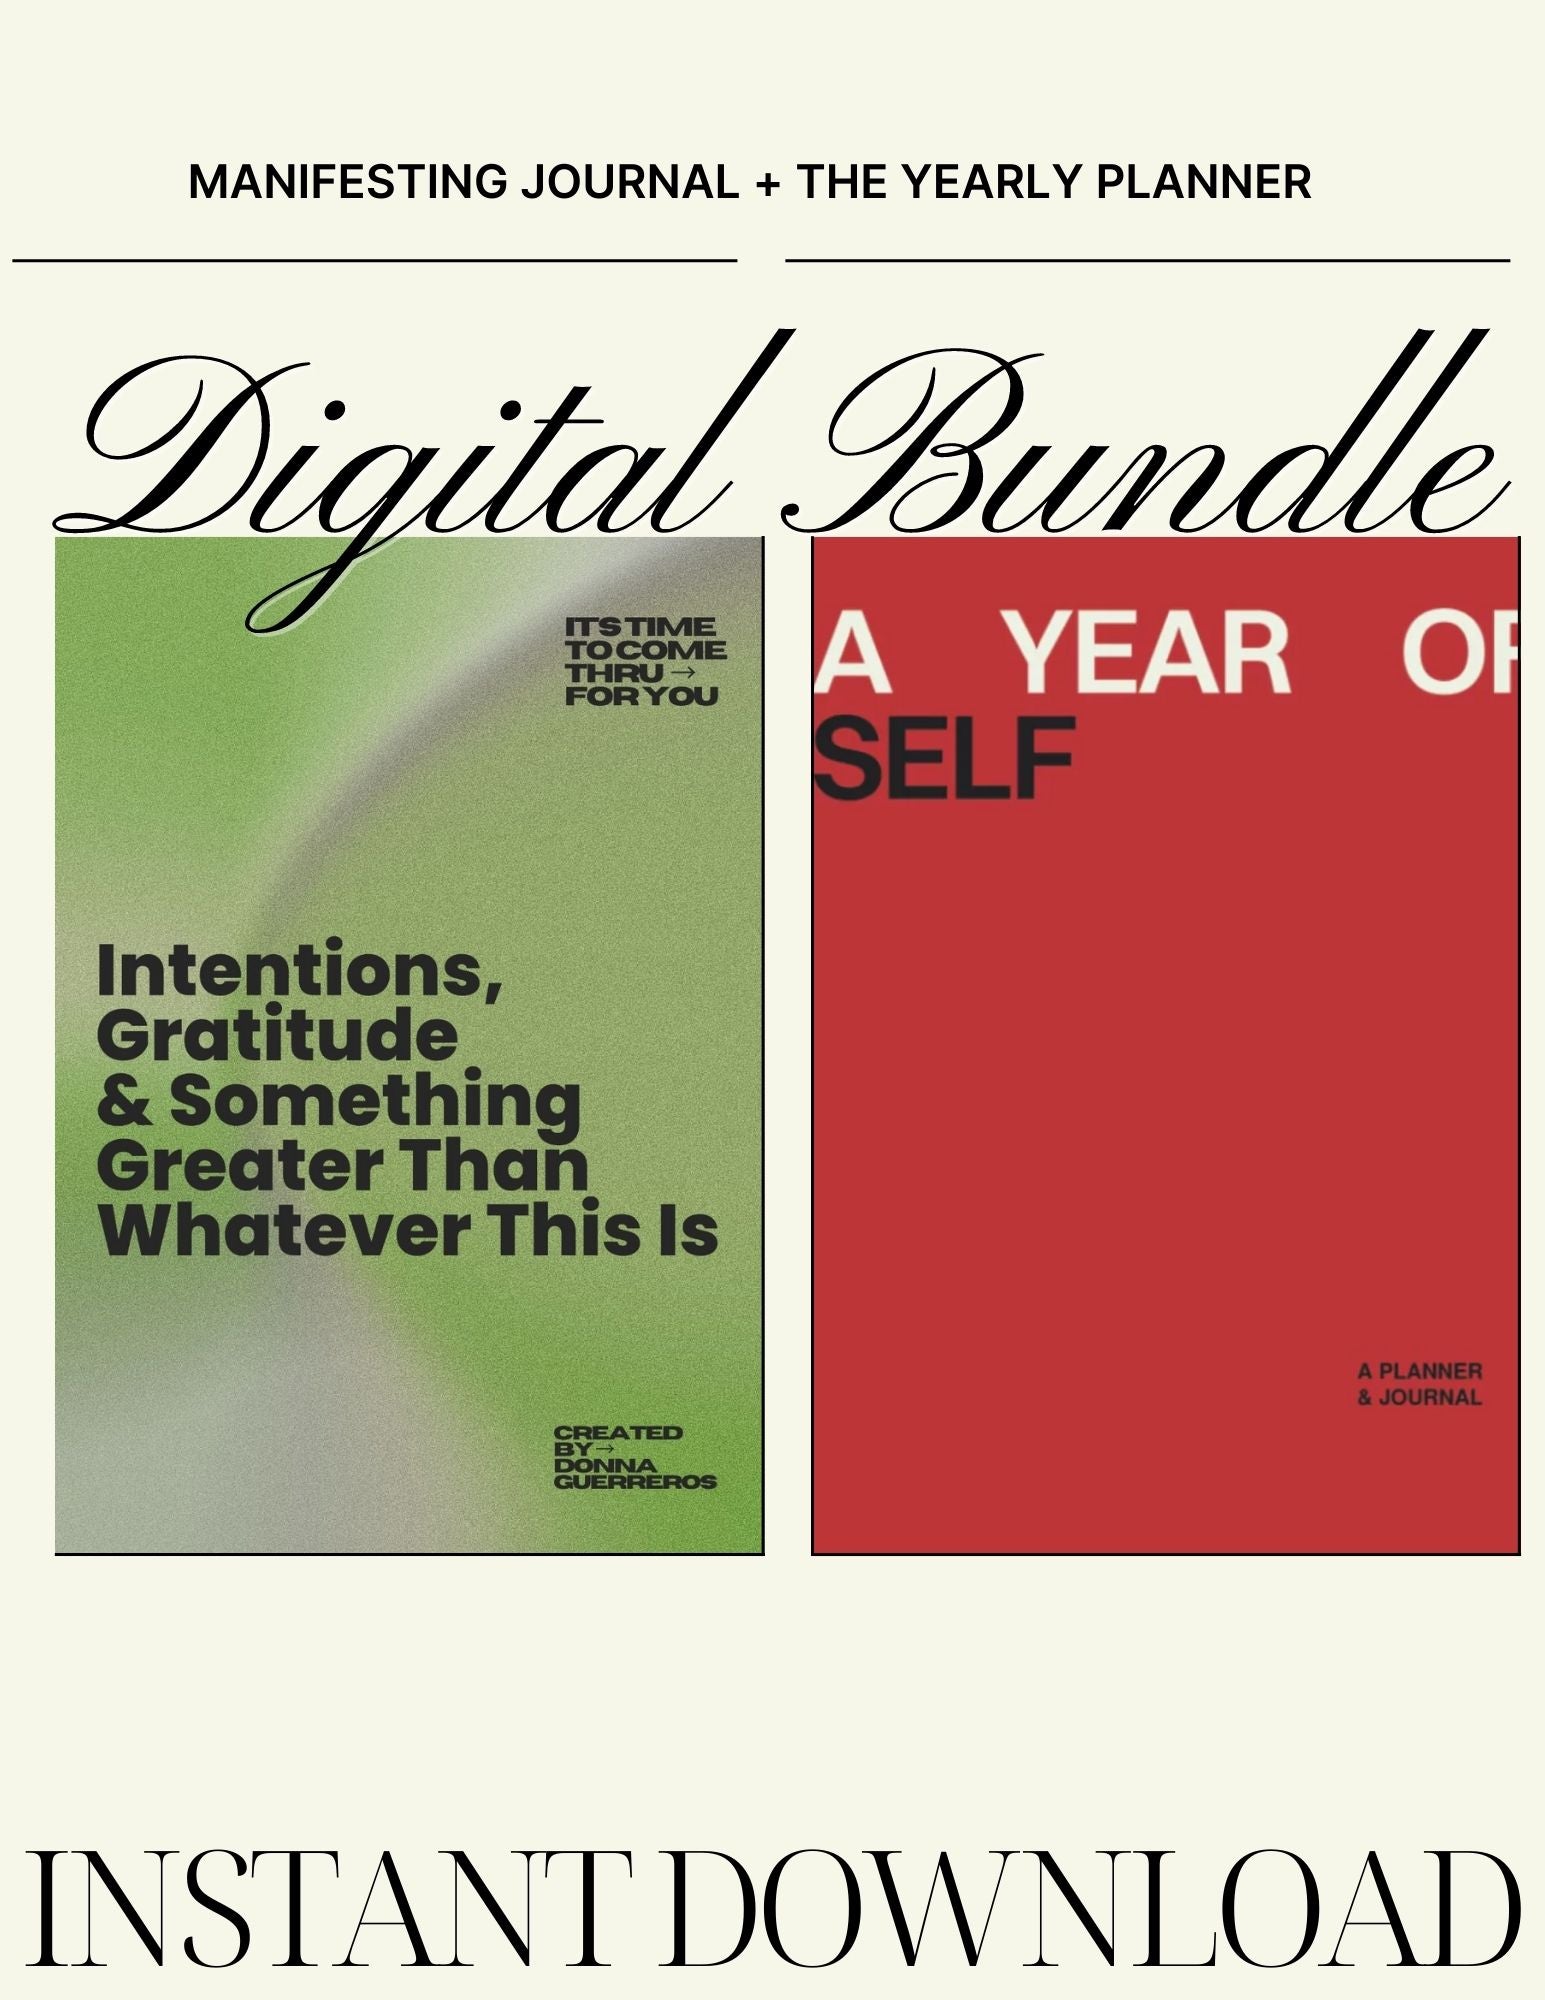 BUNDLE Monthly Manifesting Book + Yearly Planner [Digital]